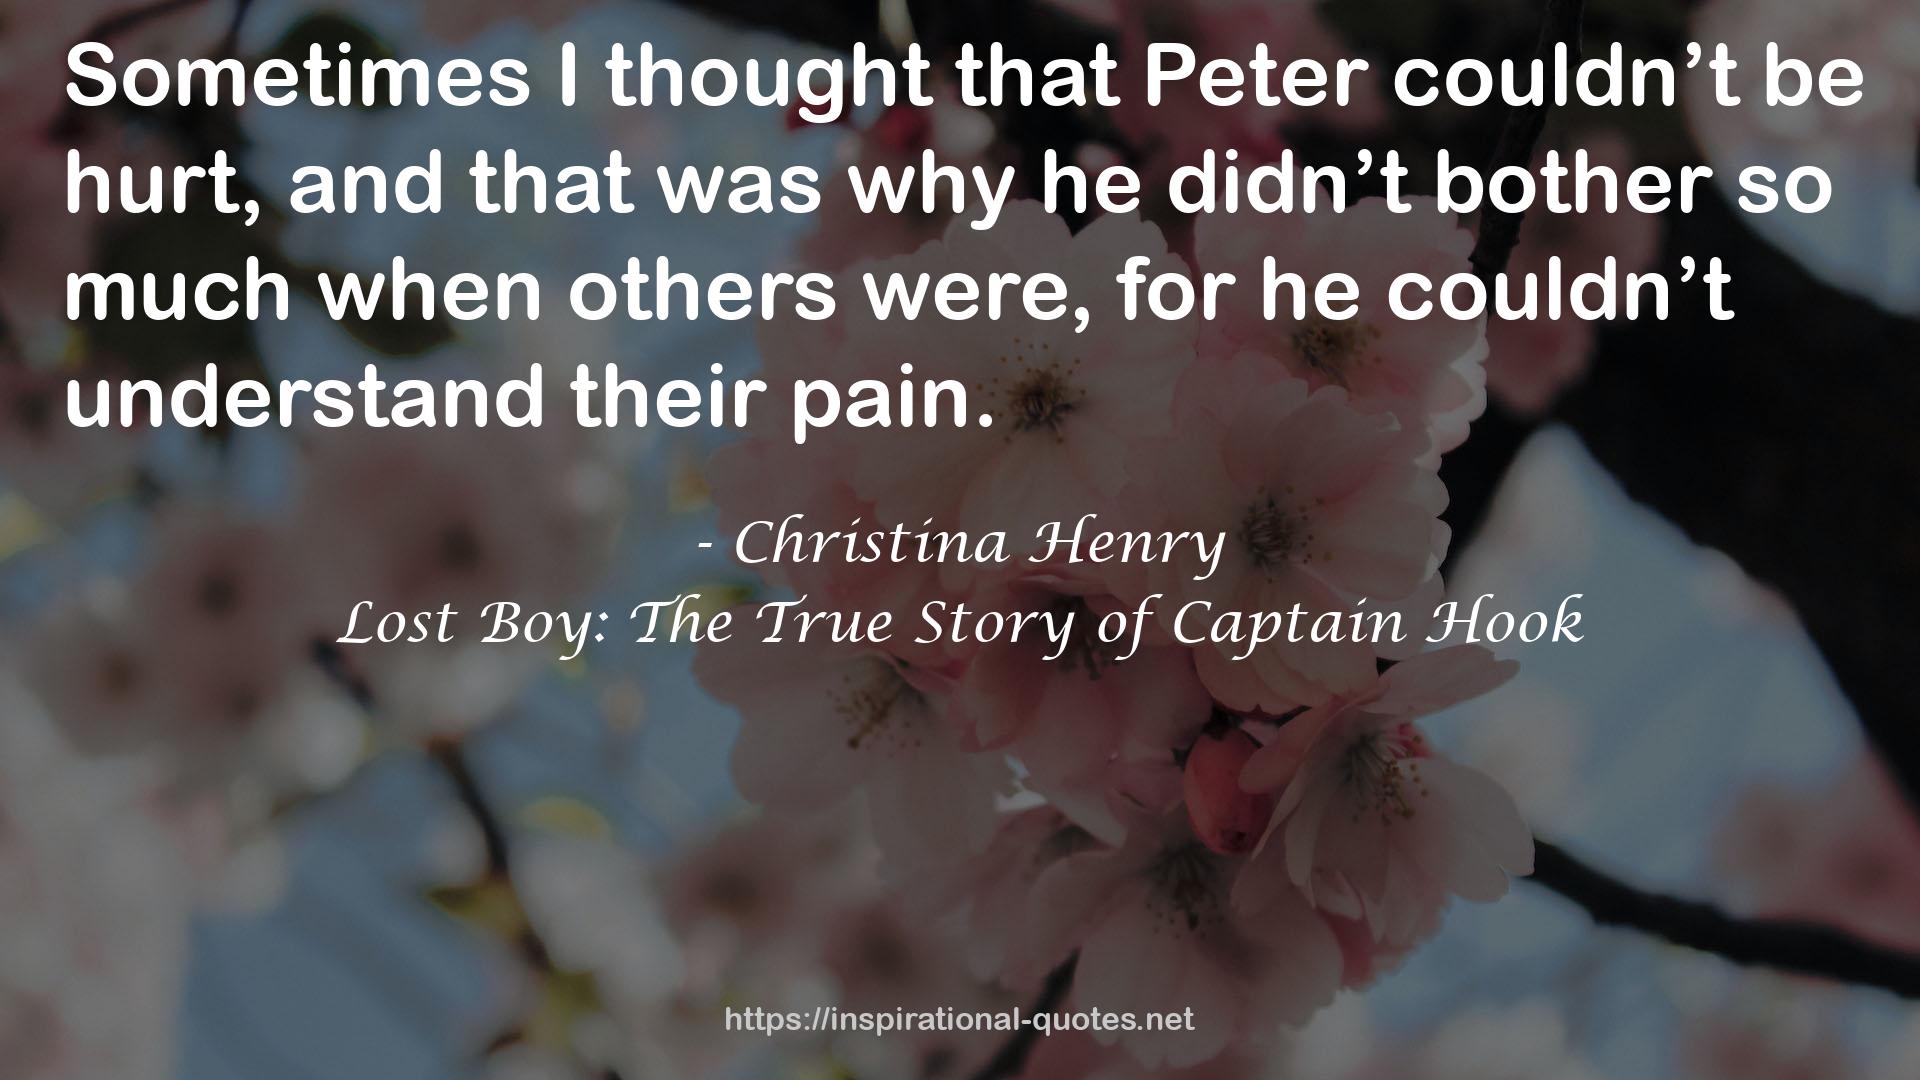 Lost Boy: The True Story of Captain Hook QUOTES